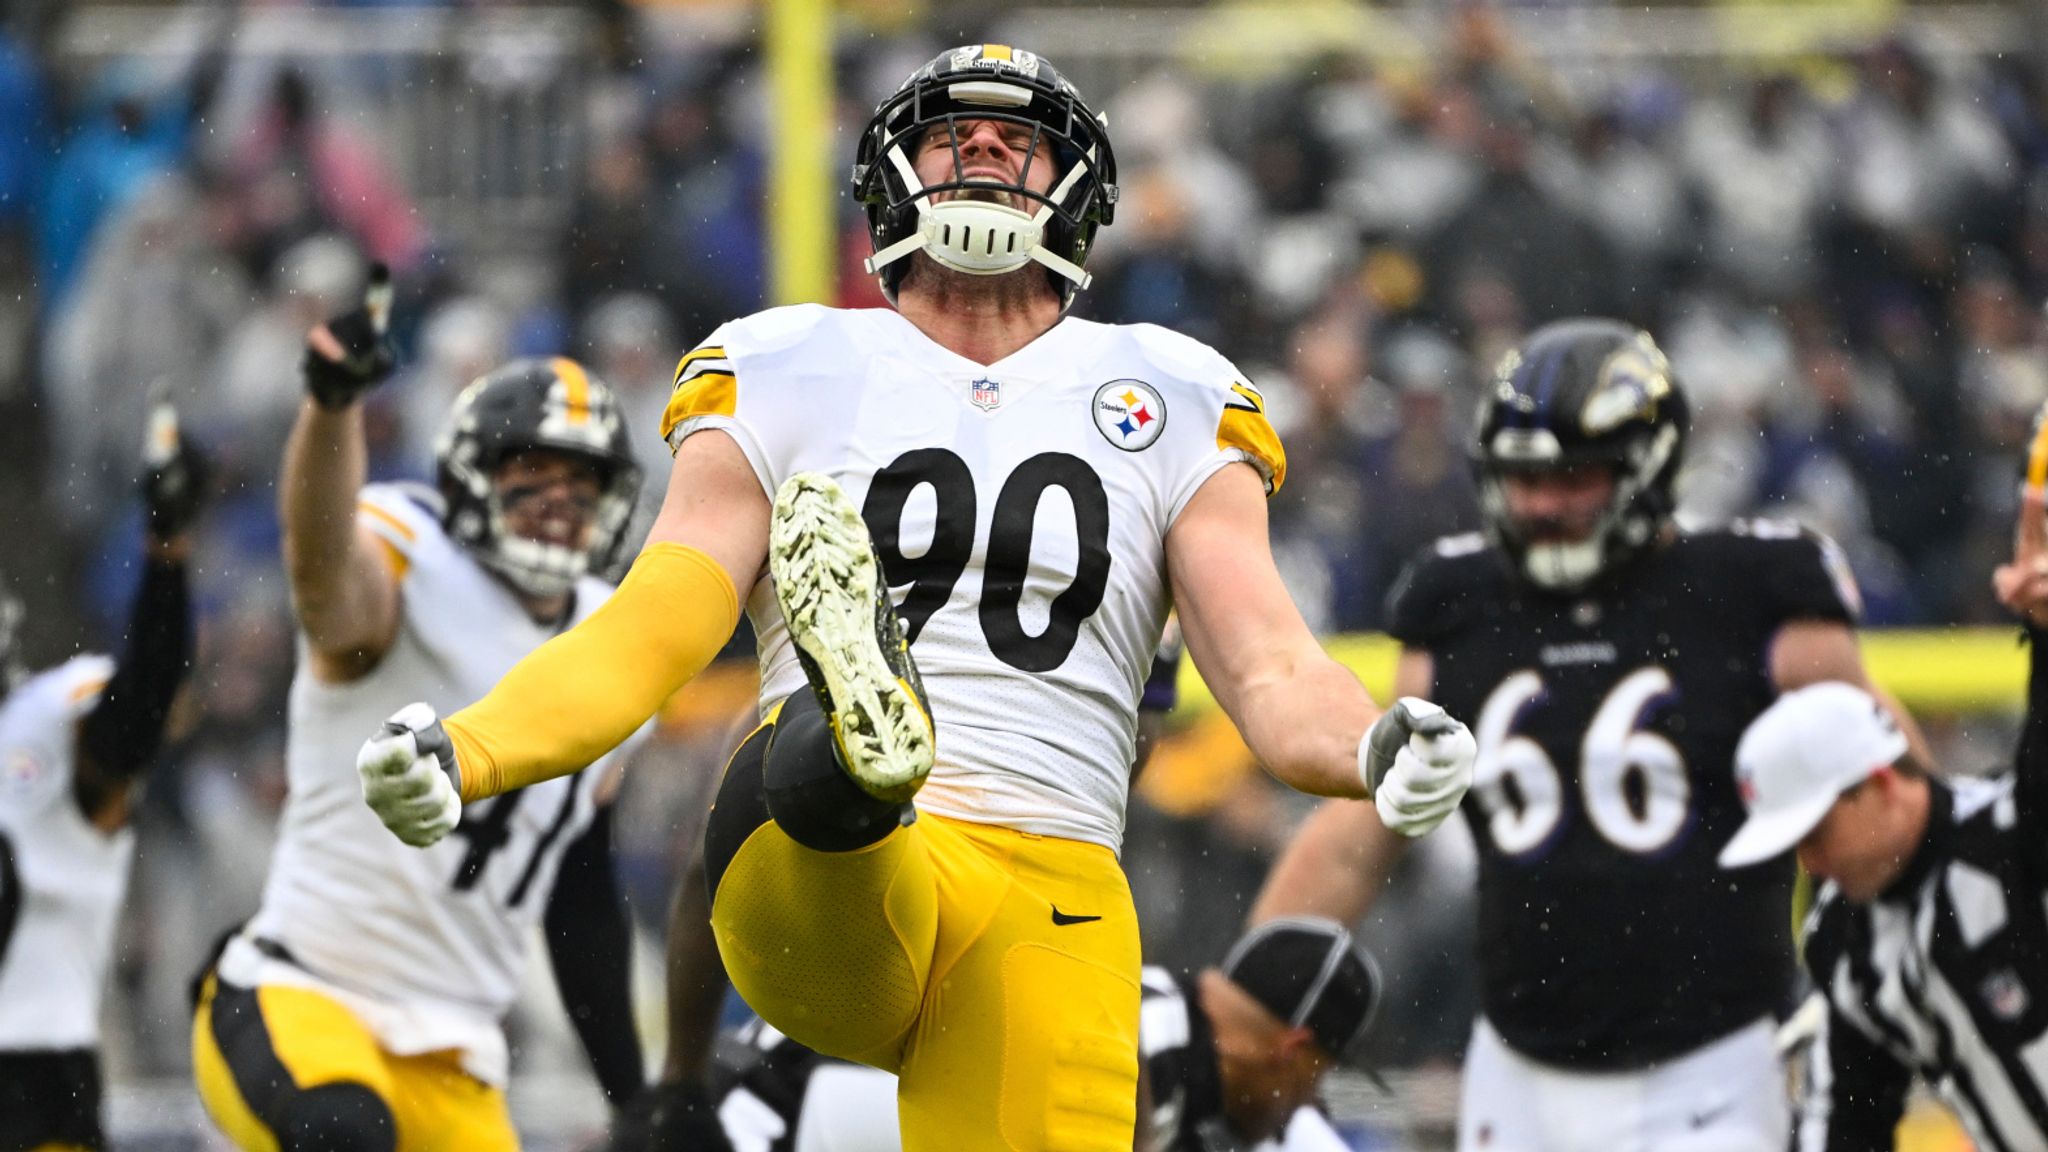 TJ Watt has been nominated for the ESPY Award of Best NFL Player